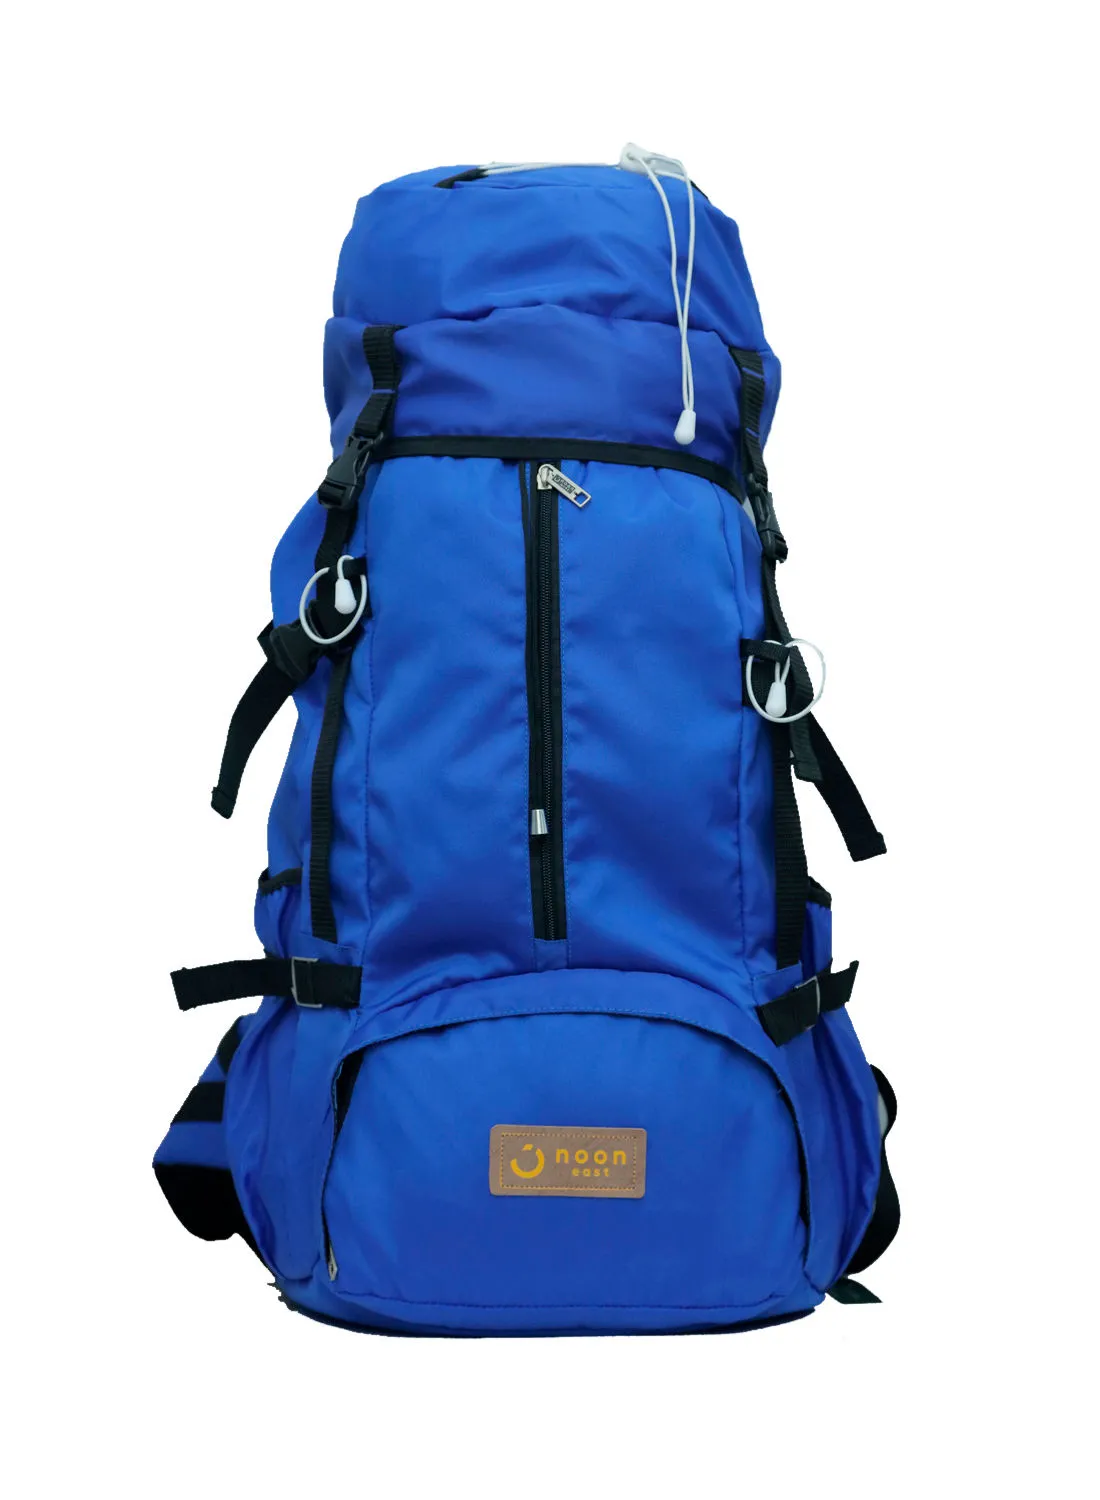 Noon East 60L Drawstring Water Resistant Multi Compartment Unisex Polyester Hiking/Trekking/Camping Backpack Compatible With 15 Inch Laptop RoyalBlue/Black